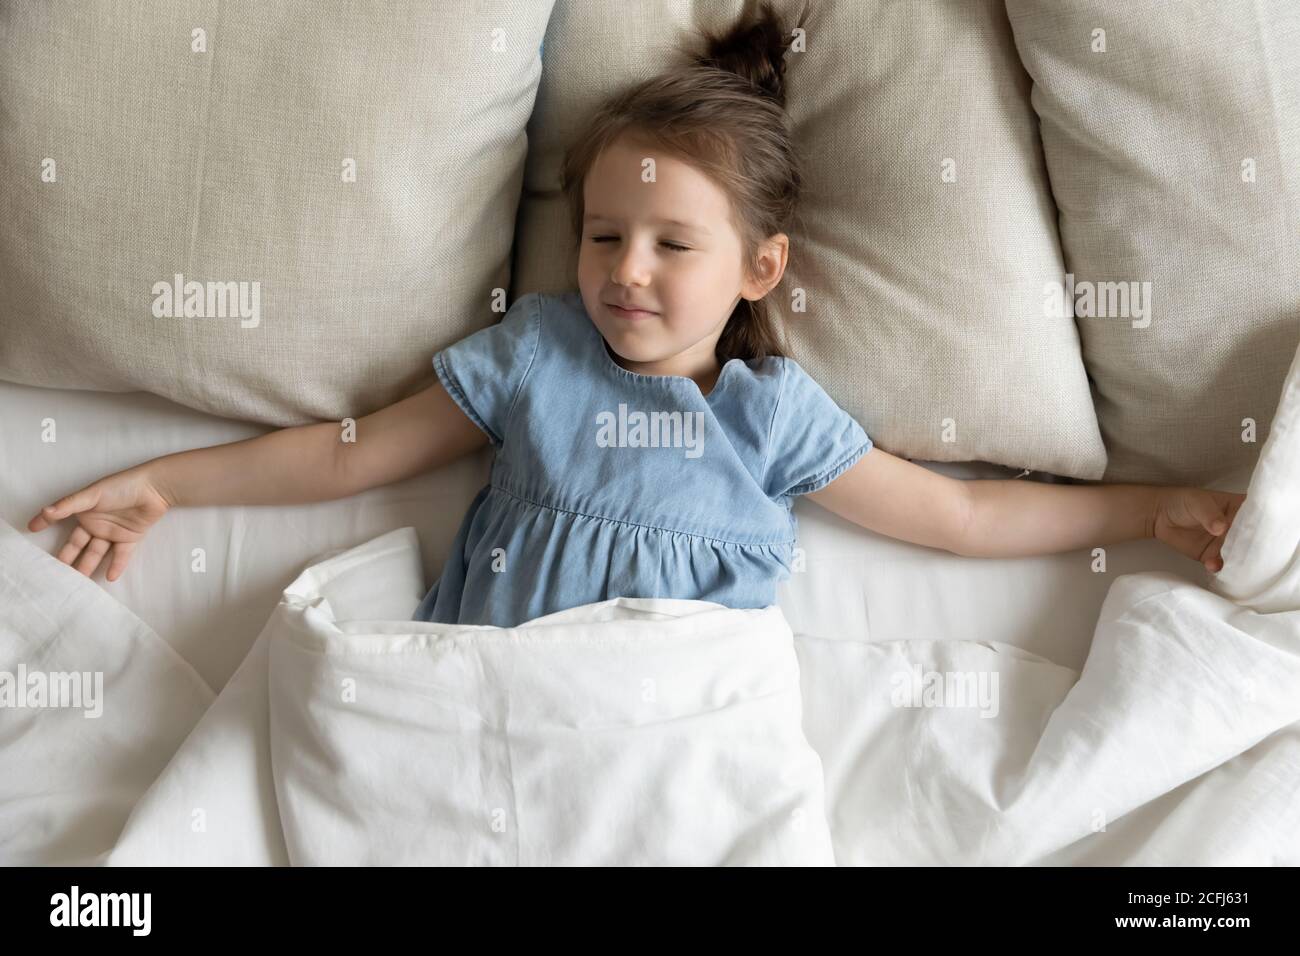 Top view little girl enjoy healthy day nap lying on bed Stock Photo